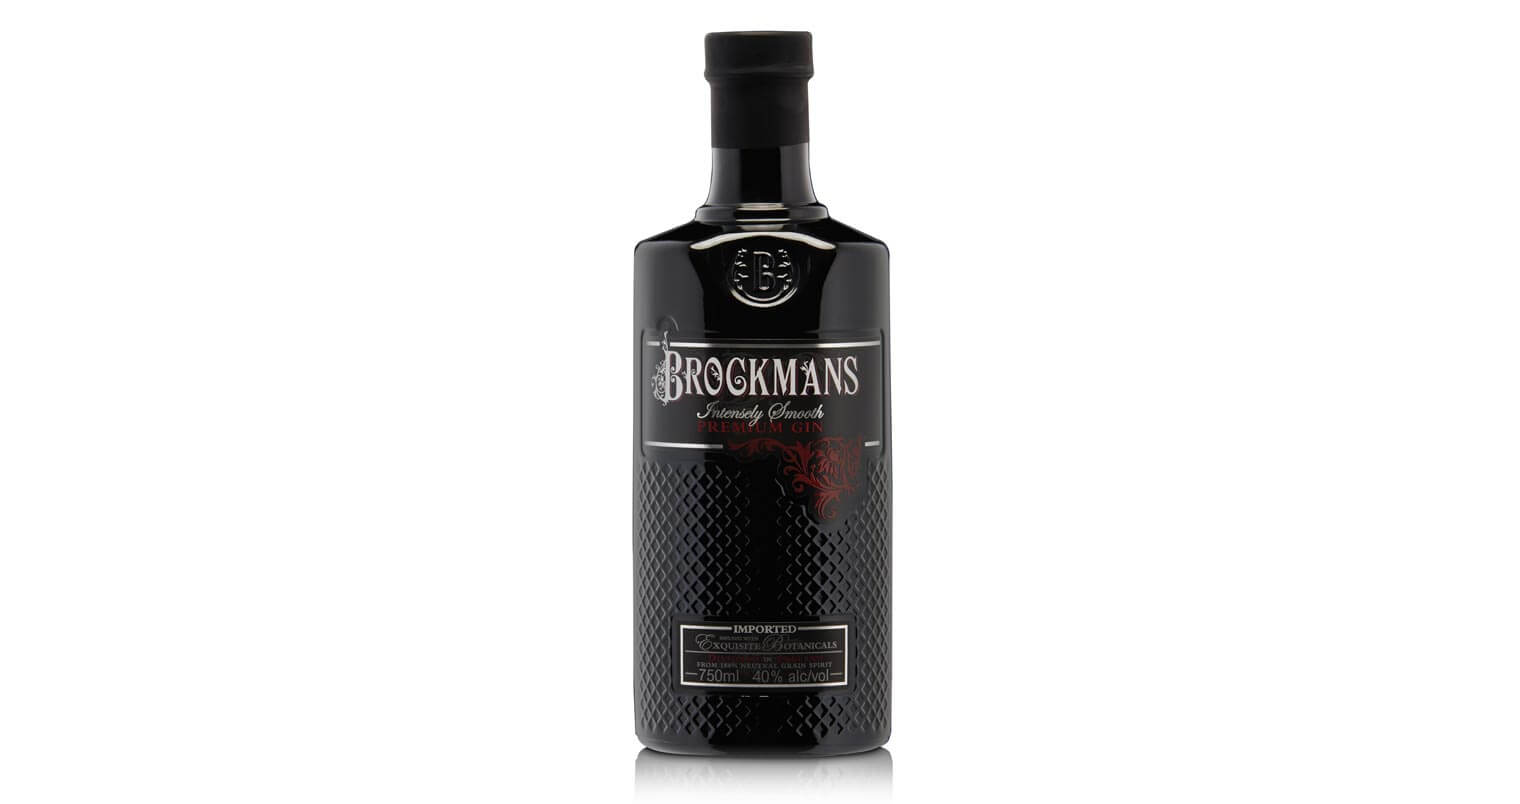 Brockmans Gin Awarded Gold at International Spirits Competitions, featured image